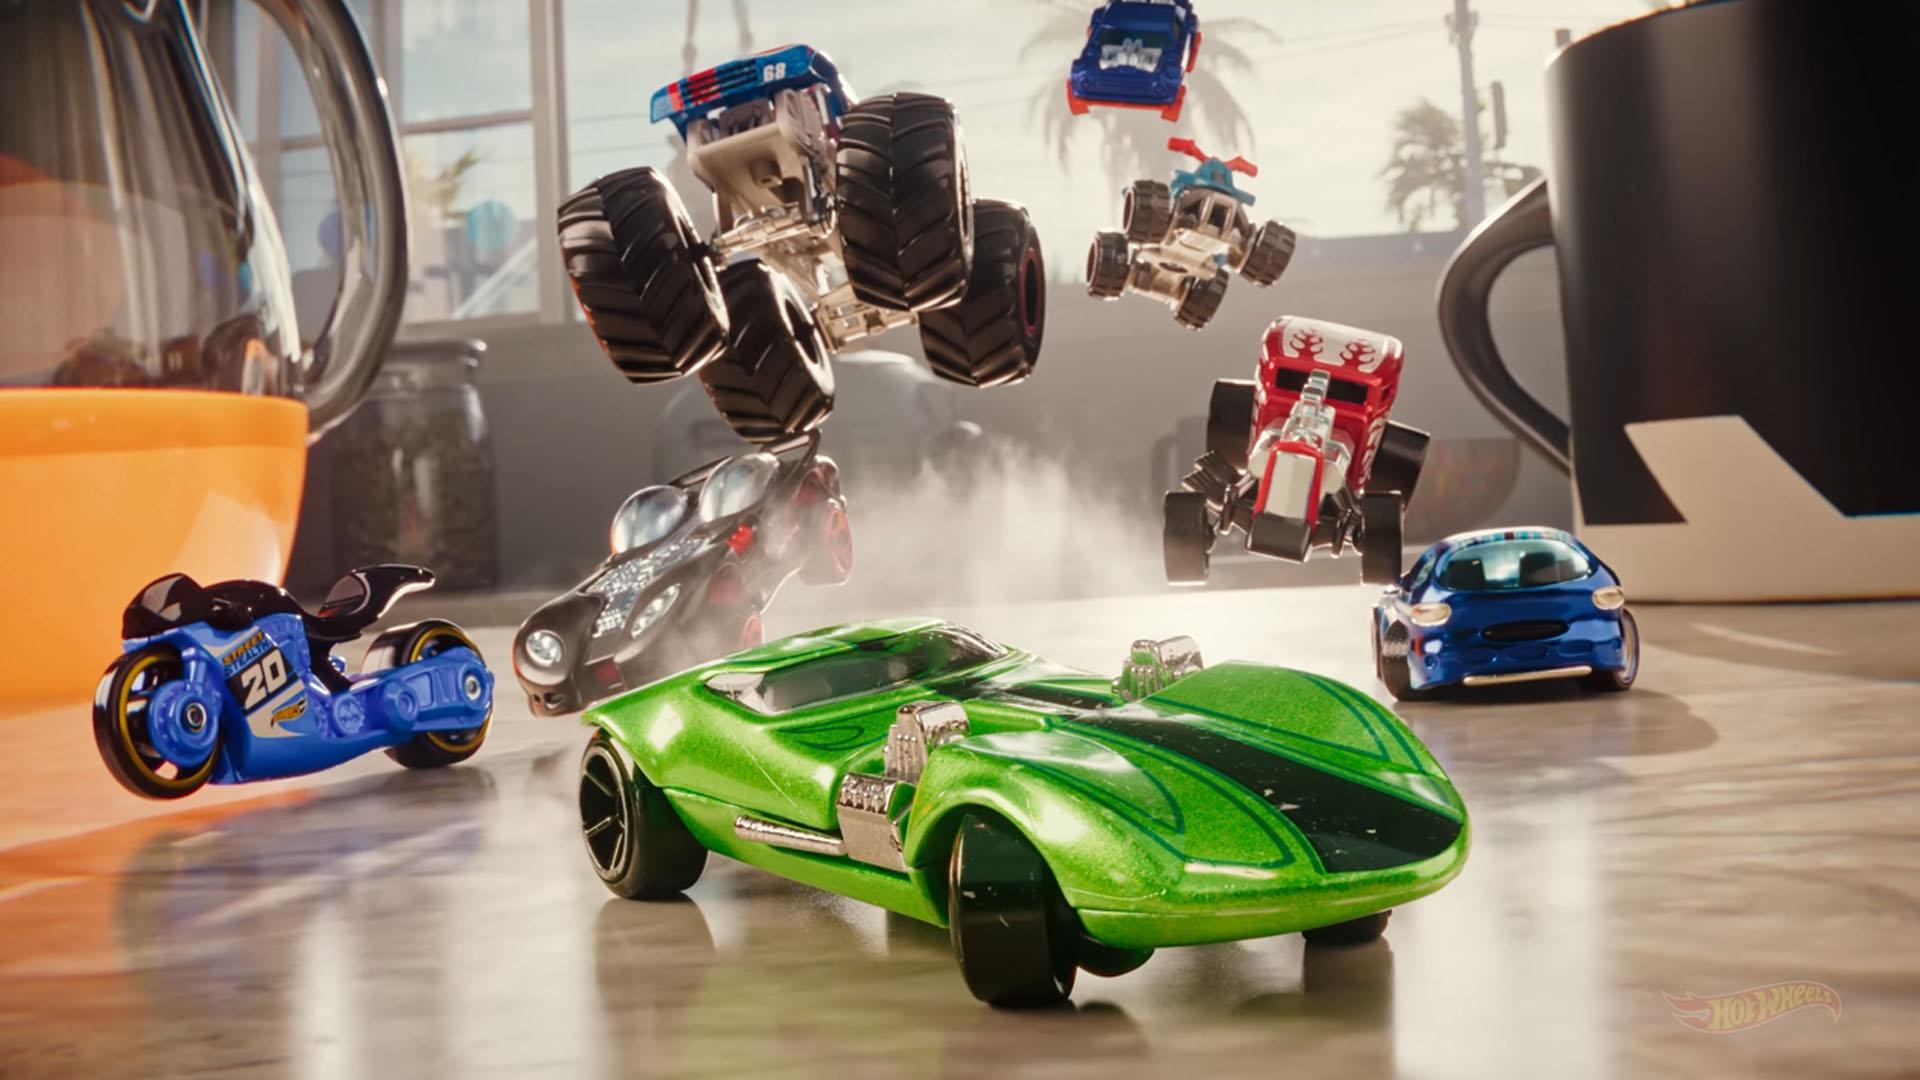 A group of cars and motorbikes speed across a kitchen countertop. They stream past a kettle and a mug, which appear giant next to the tiny vehicles